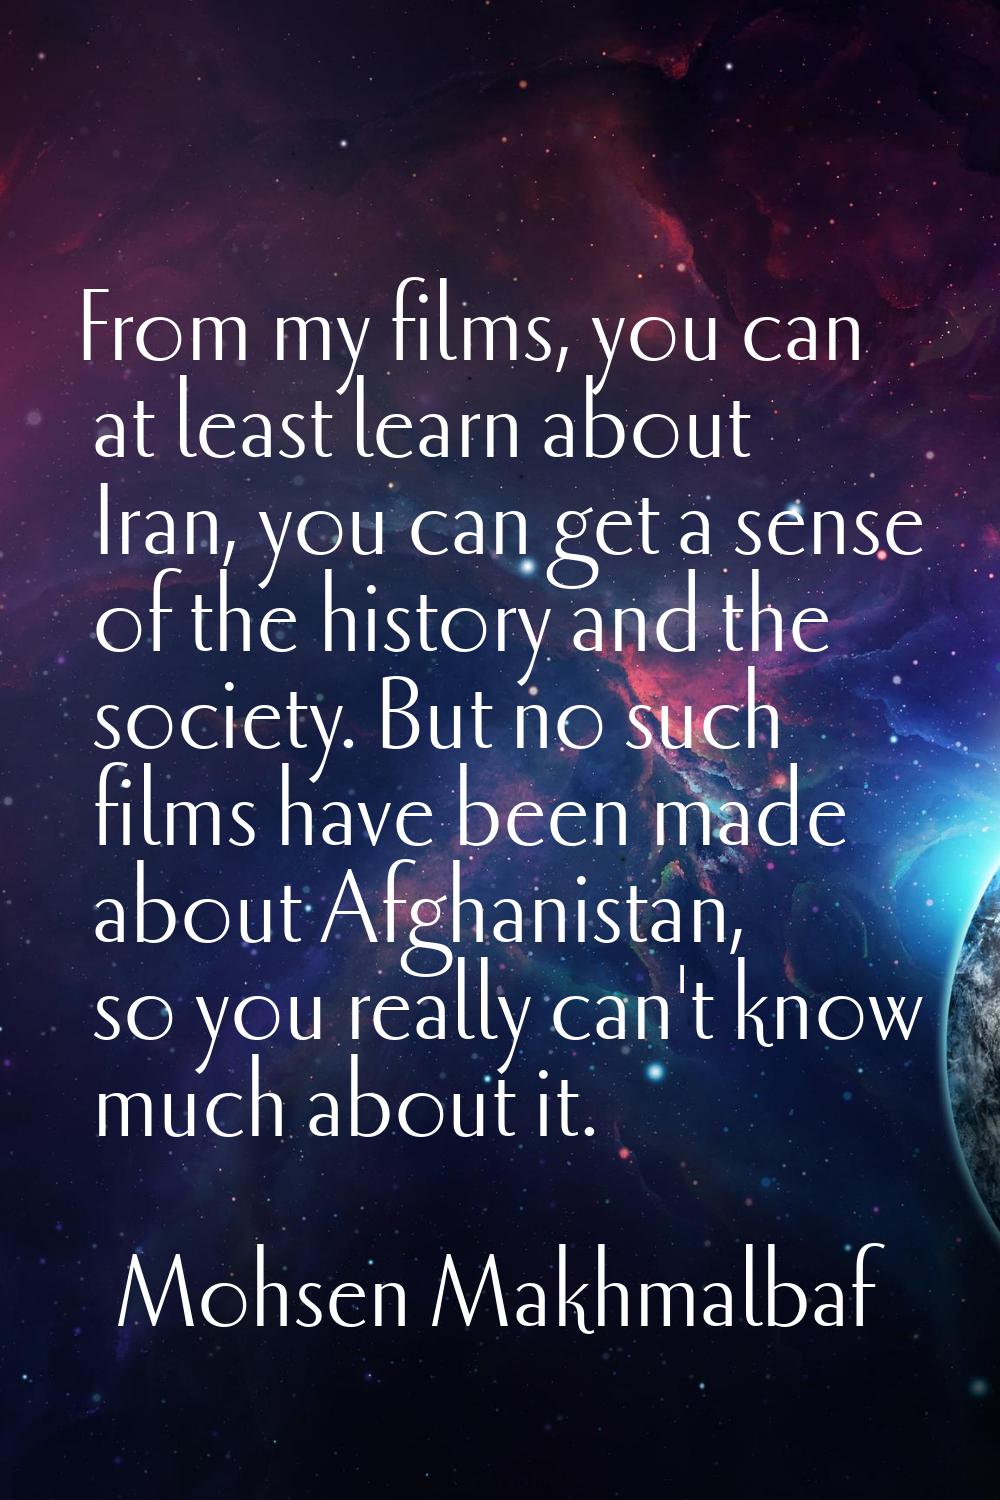 From my films, you can at least learn about Iran, you can get a sense of the history and the societ